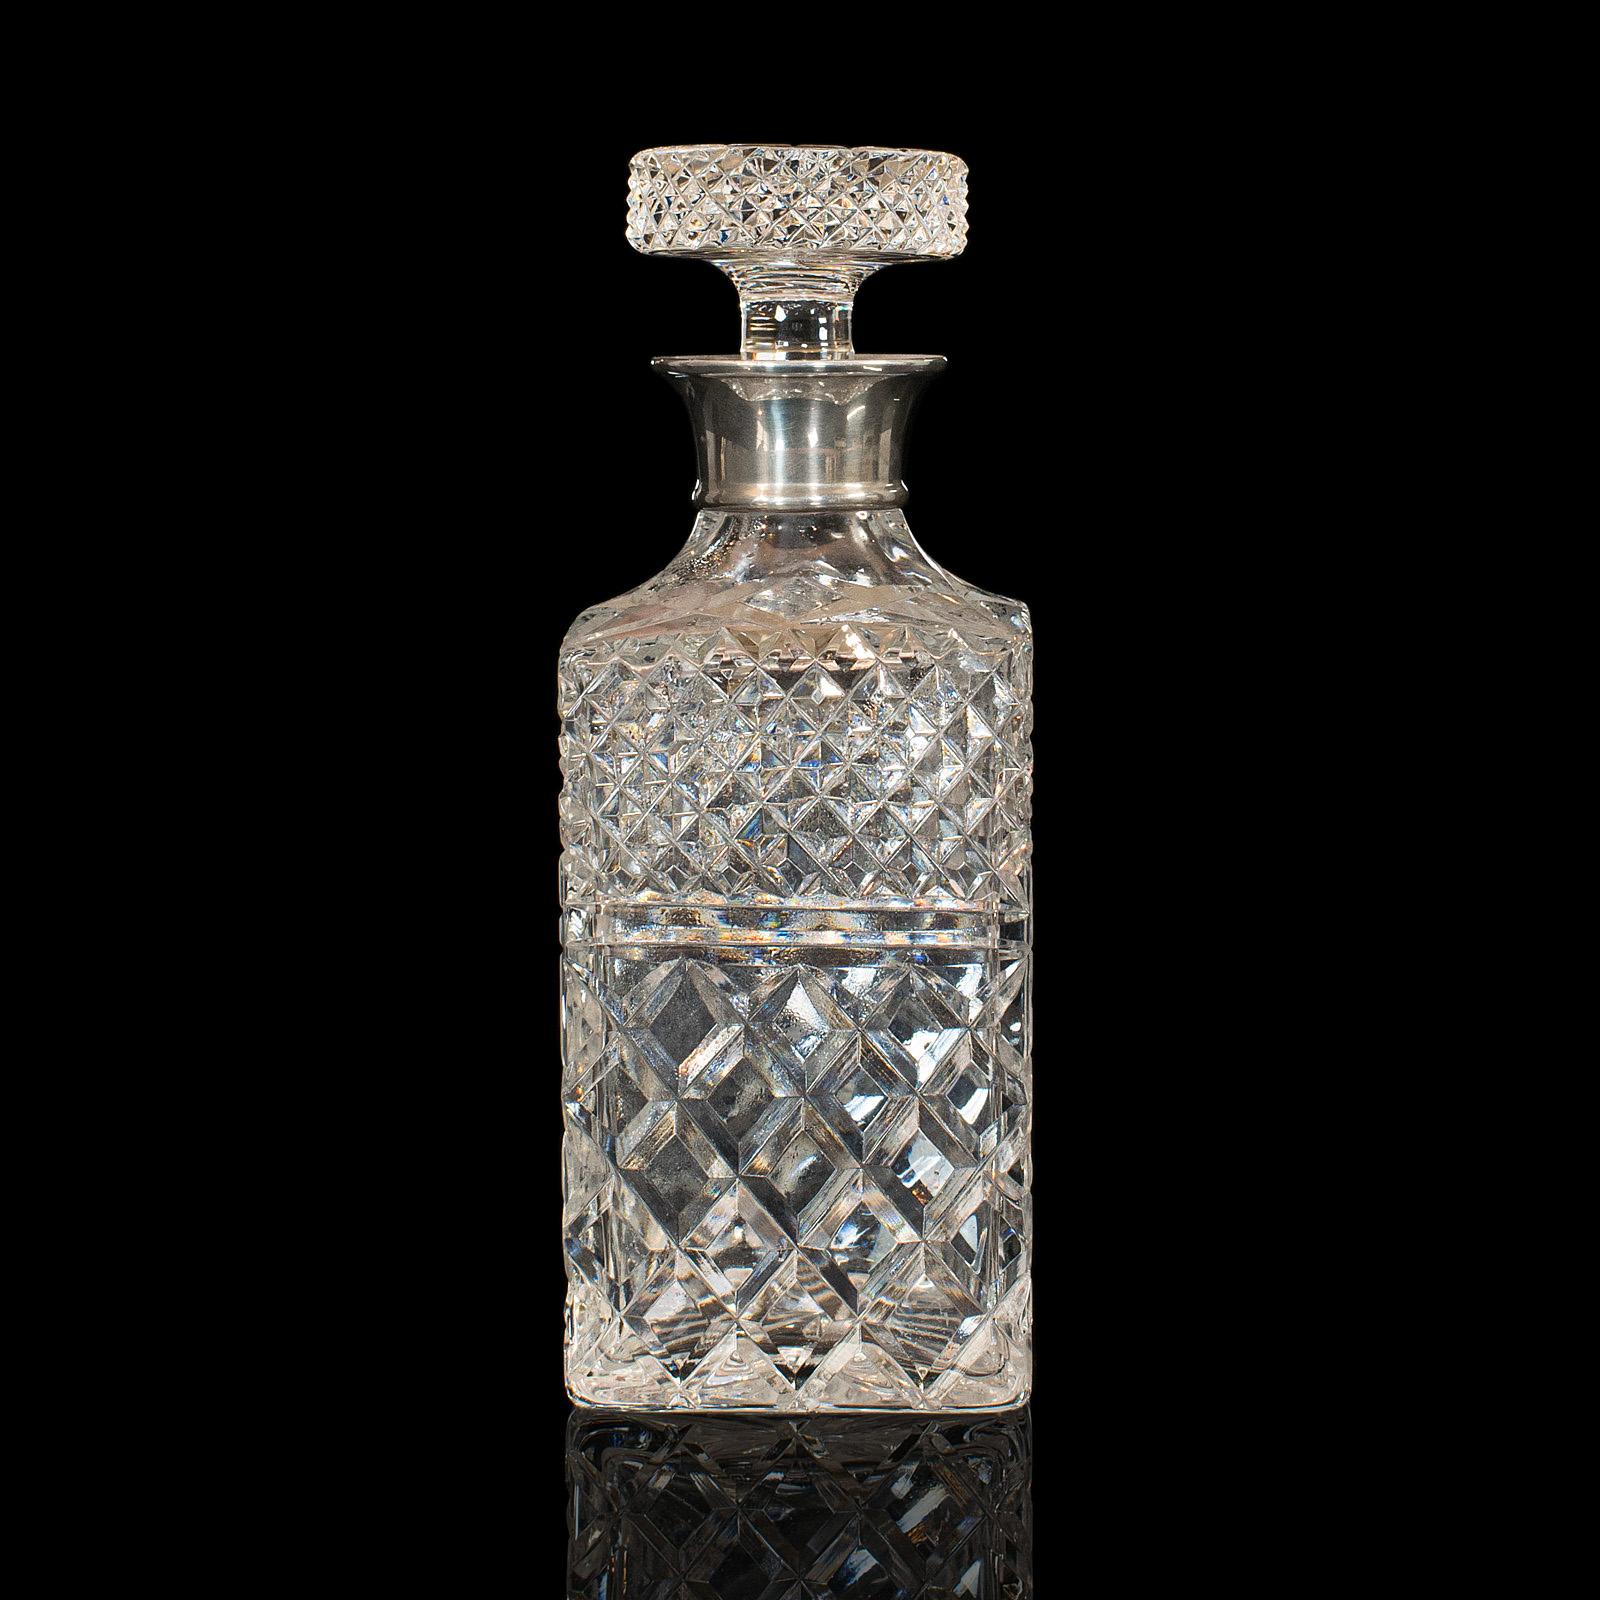 This is a vintage decanter. An English, cut glass and silver collared flask with London hallmark, dating it to the late 20th century, 1971.

Striking decanter with a superb stopper
Displays a desirable aged patina
Cut glass in good order